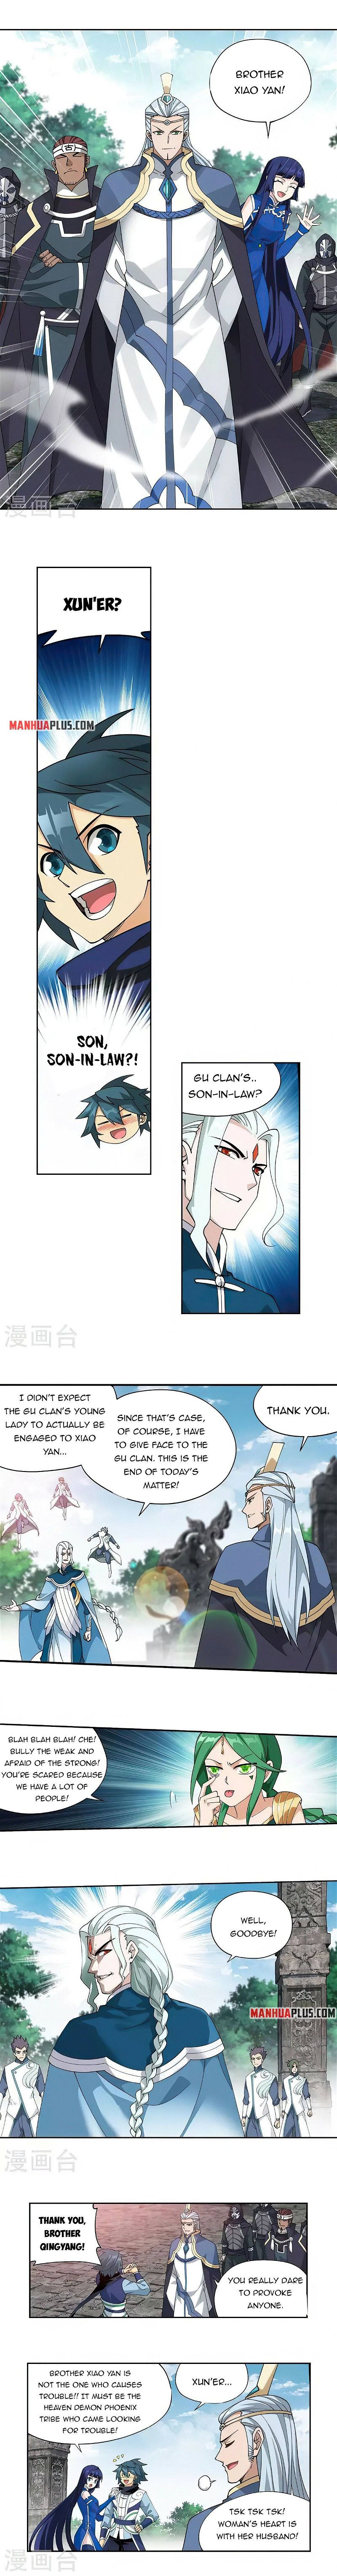 Doupo Cangqiong Chapter 369 page 2